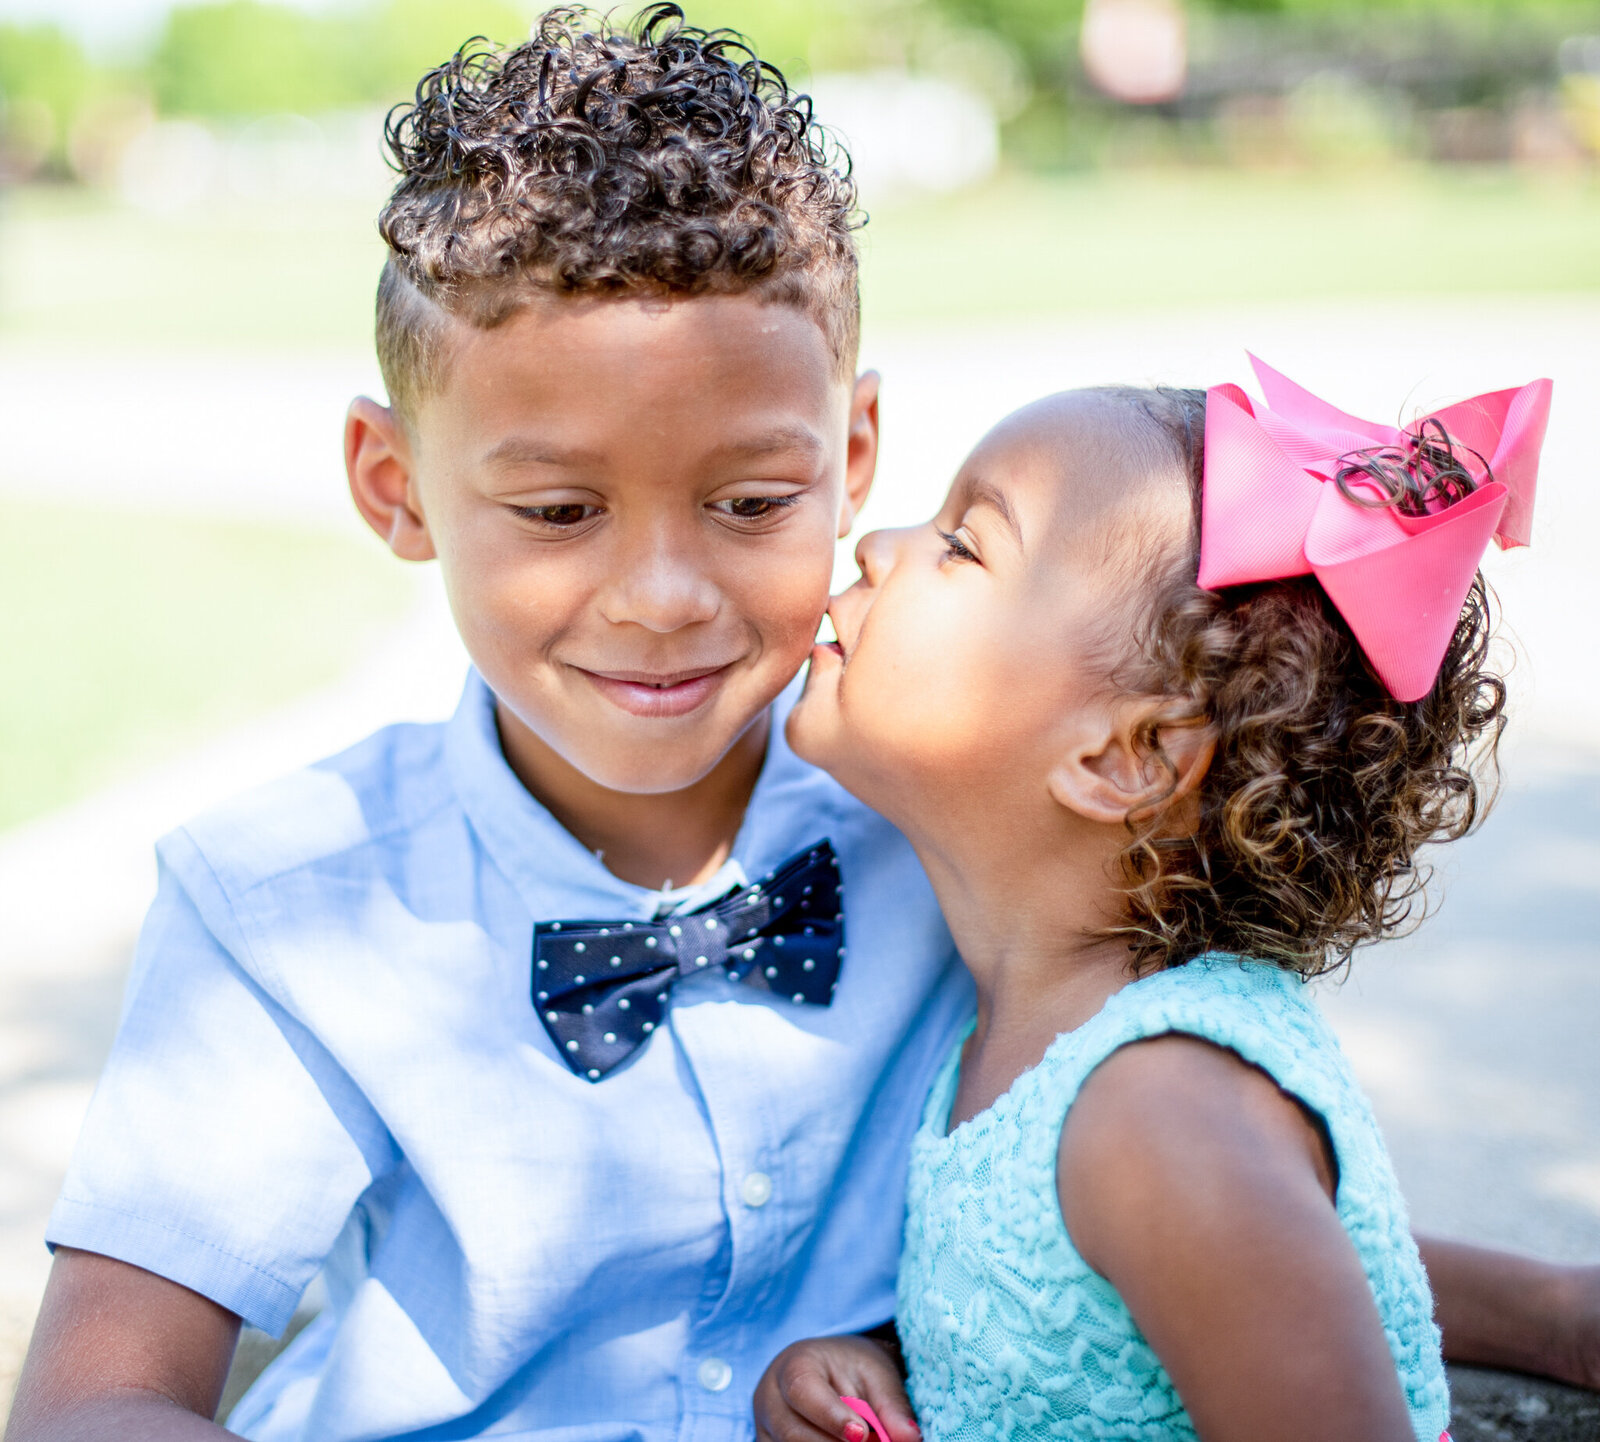 young boy wearing a bow tie receiving a kiss on the cheek from his sister photographed by Millz Photography in Greenville, SC